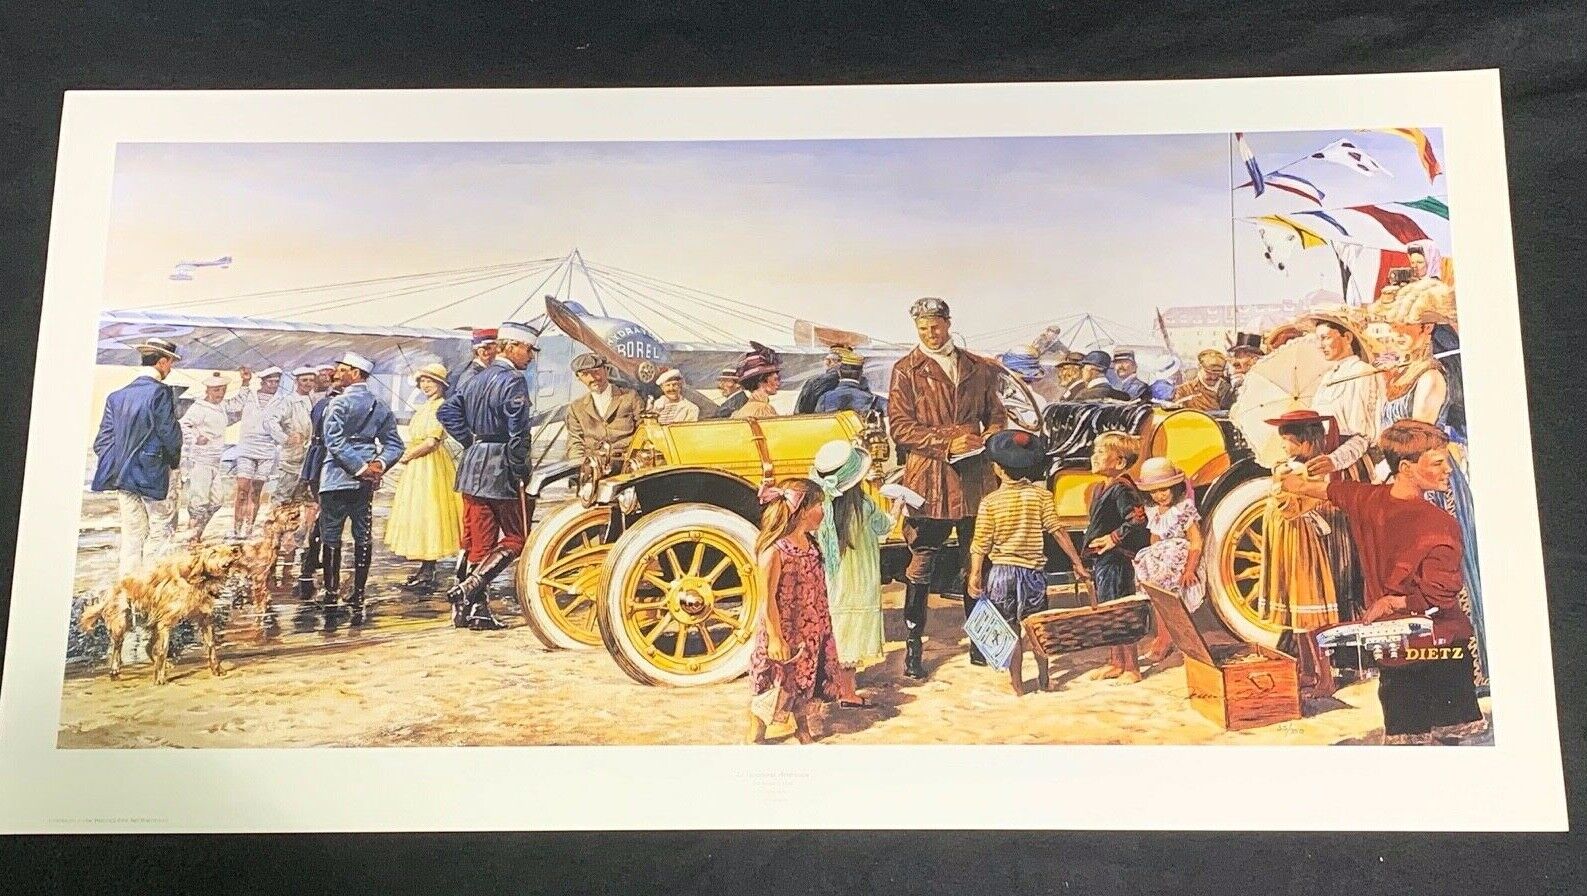 1996 James Dietz "le Vainqueur American" Limited Edition Signed & Numbered Print